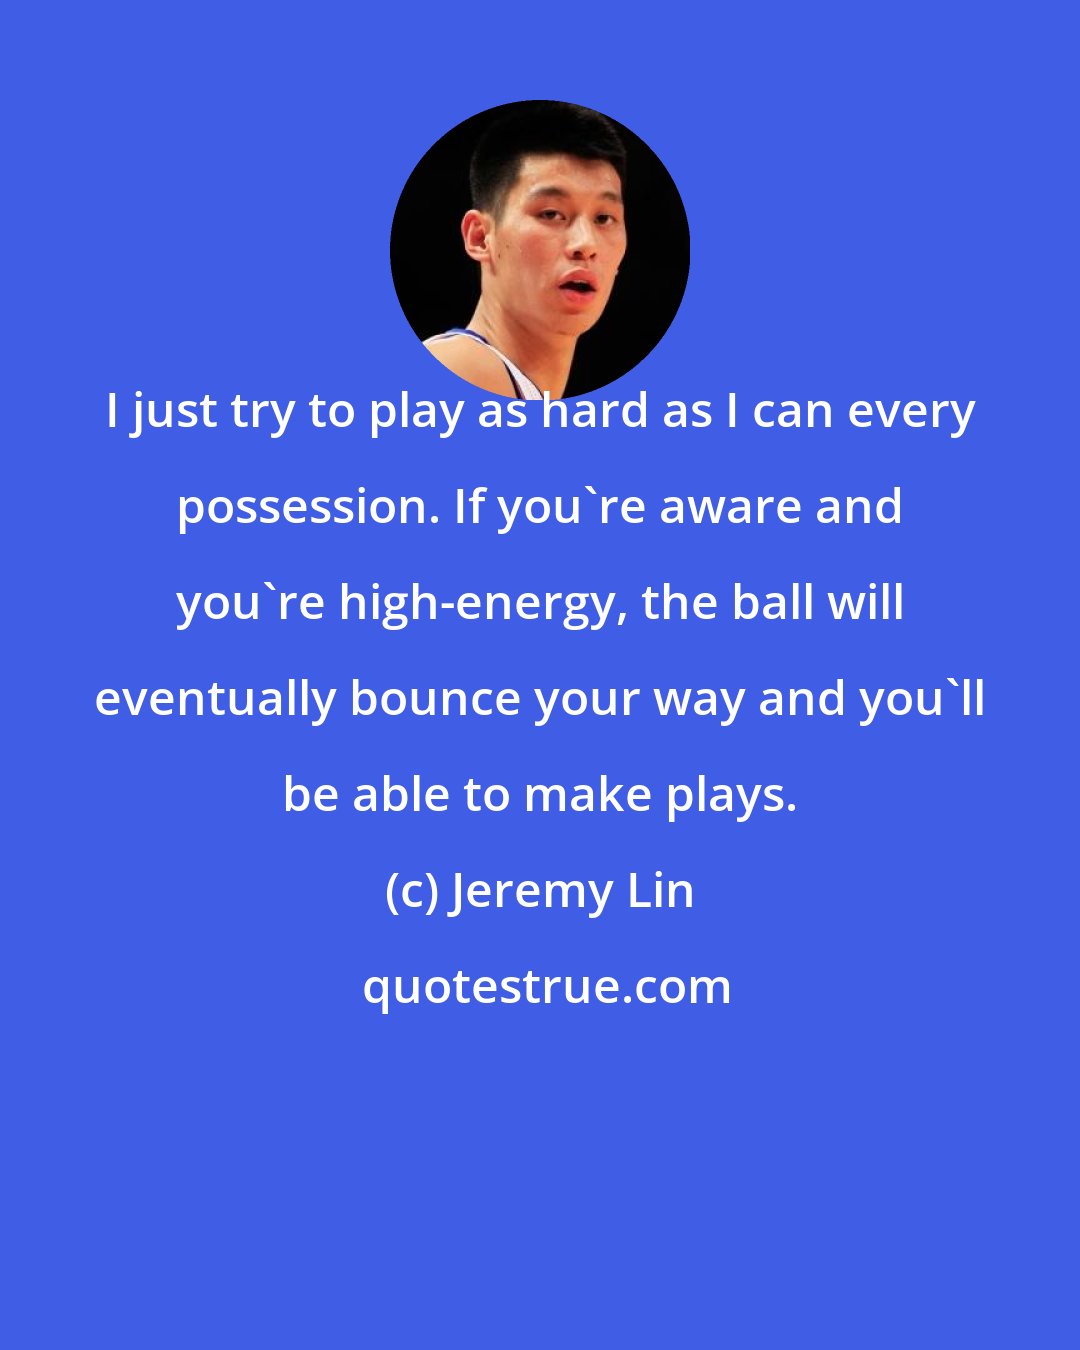 Jeremy Lin: I just try to play as hard as I can every possession. If you're aware and you're high-energy, the ball will eventually bounce your way and you'll be able to make plays.